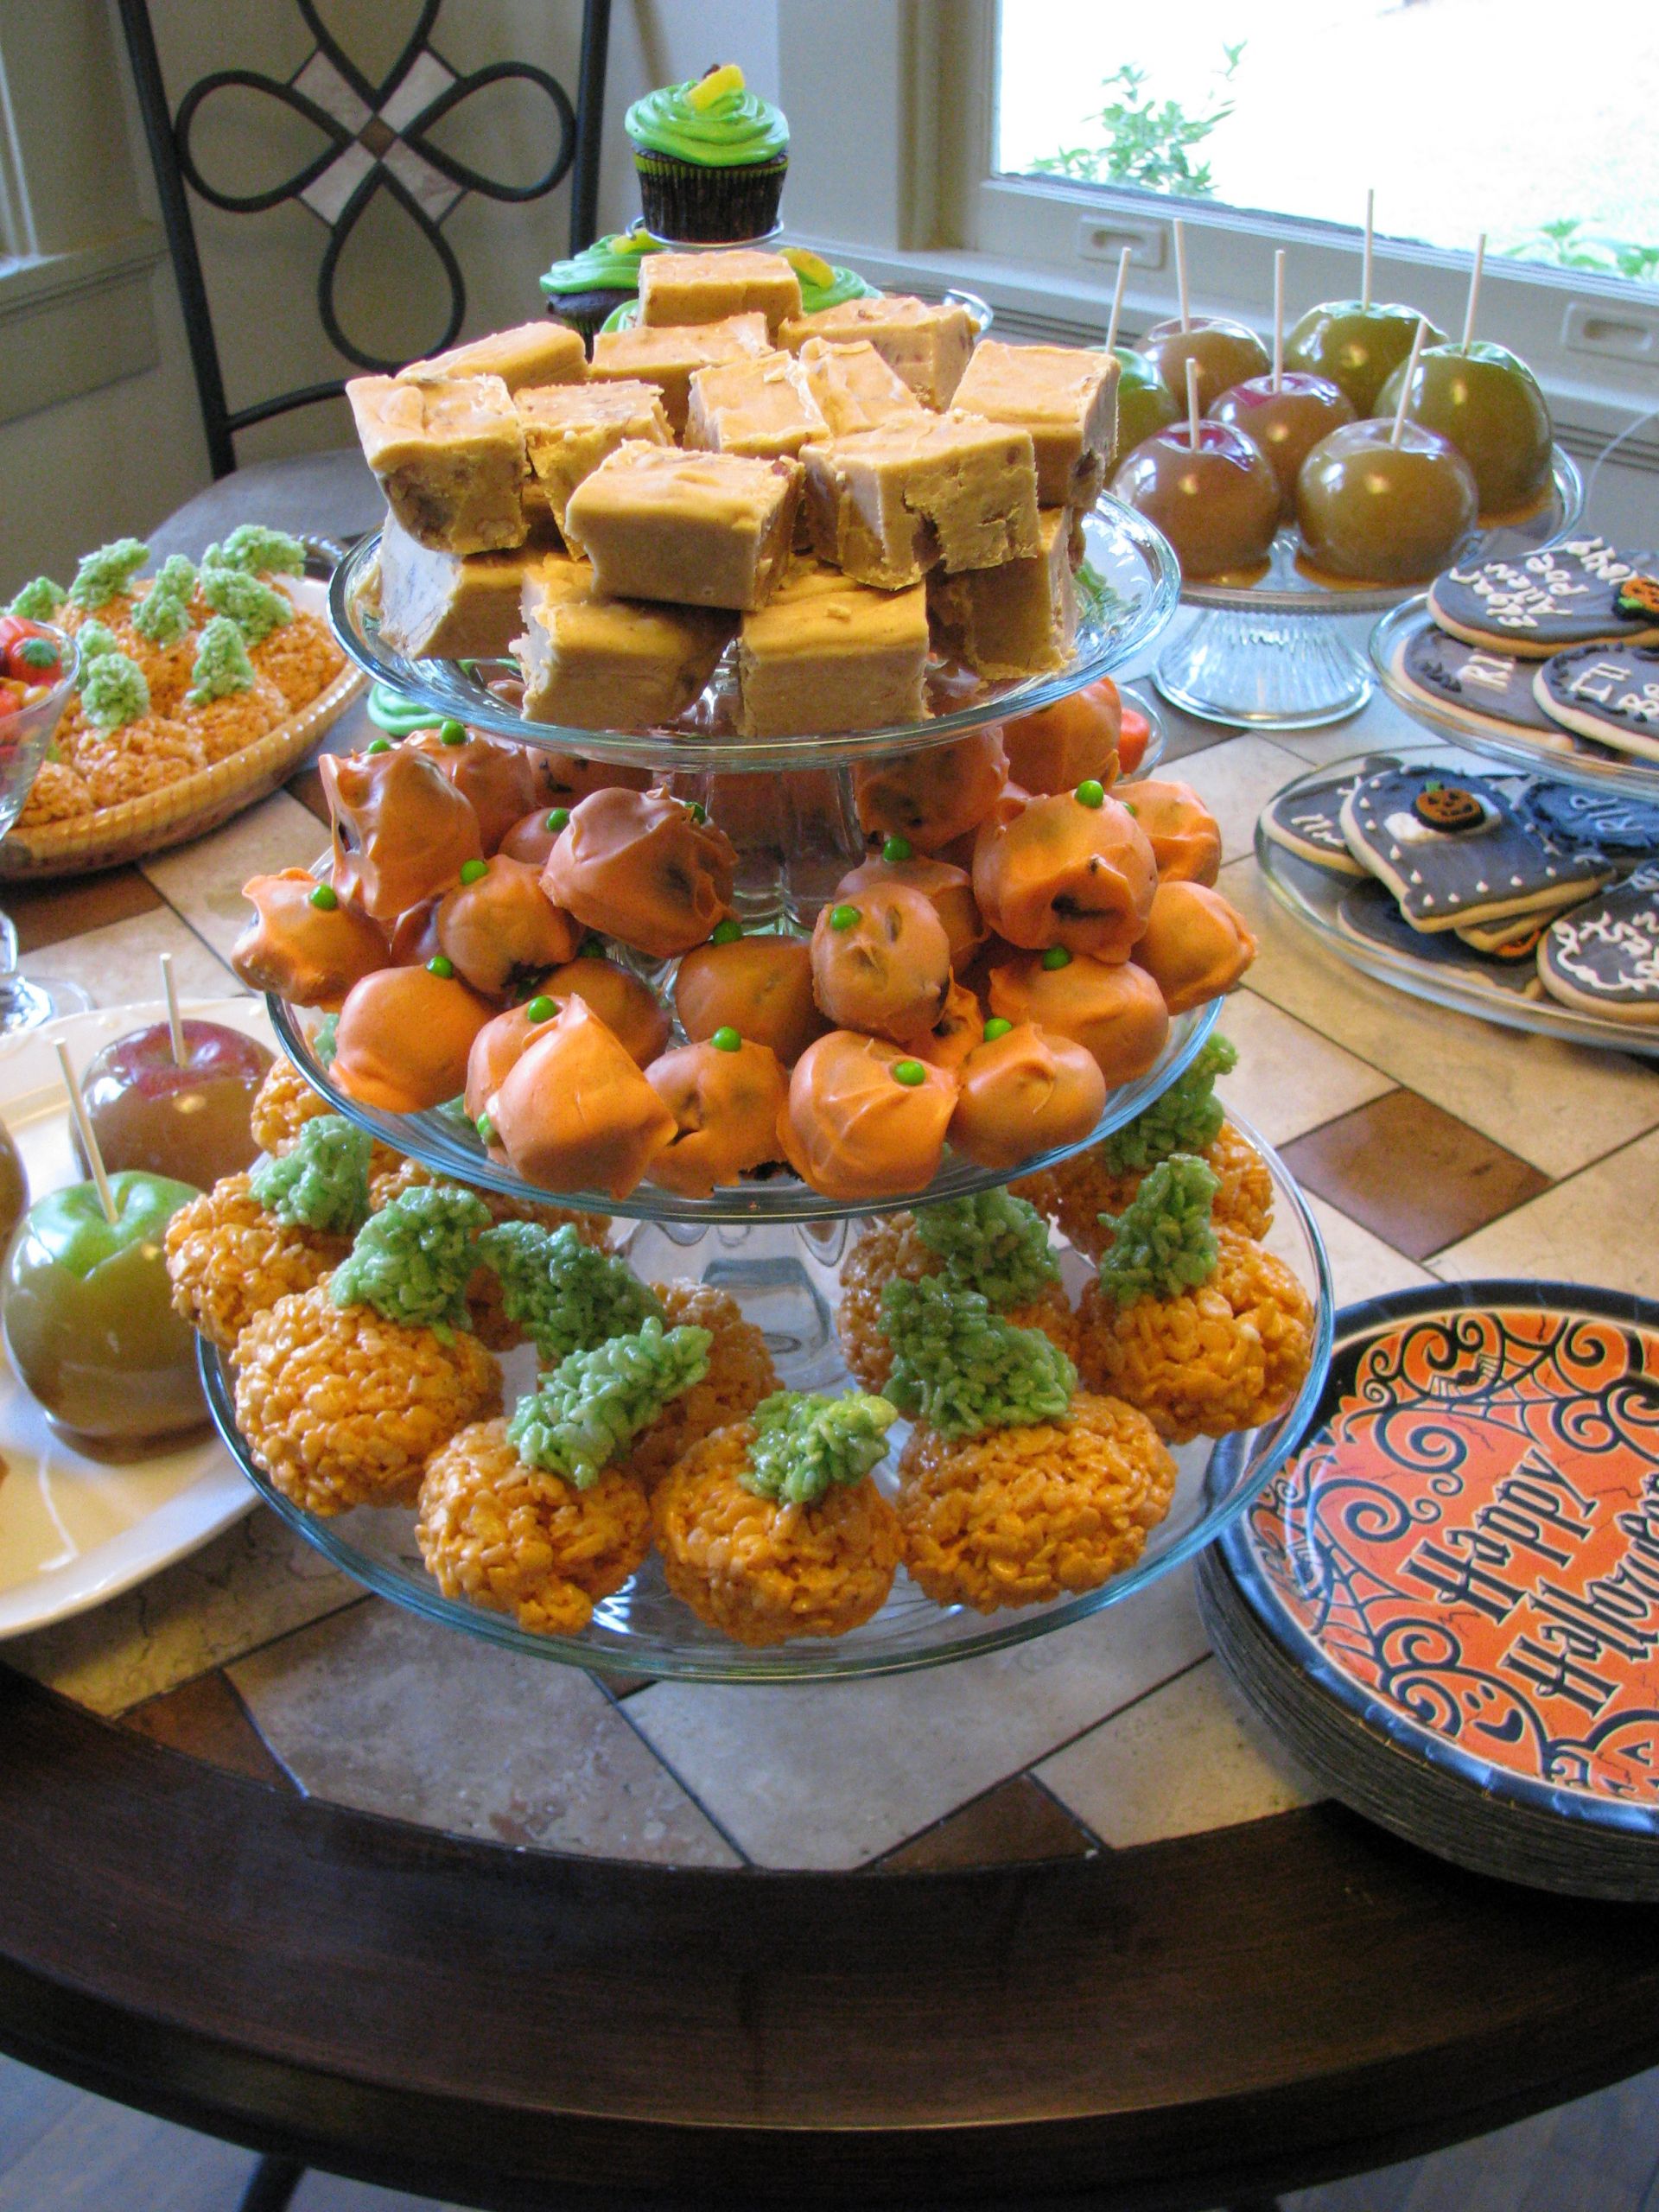 Halloween Party Desserts
 The Halloween Party Part 2–Desserts